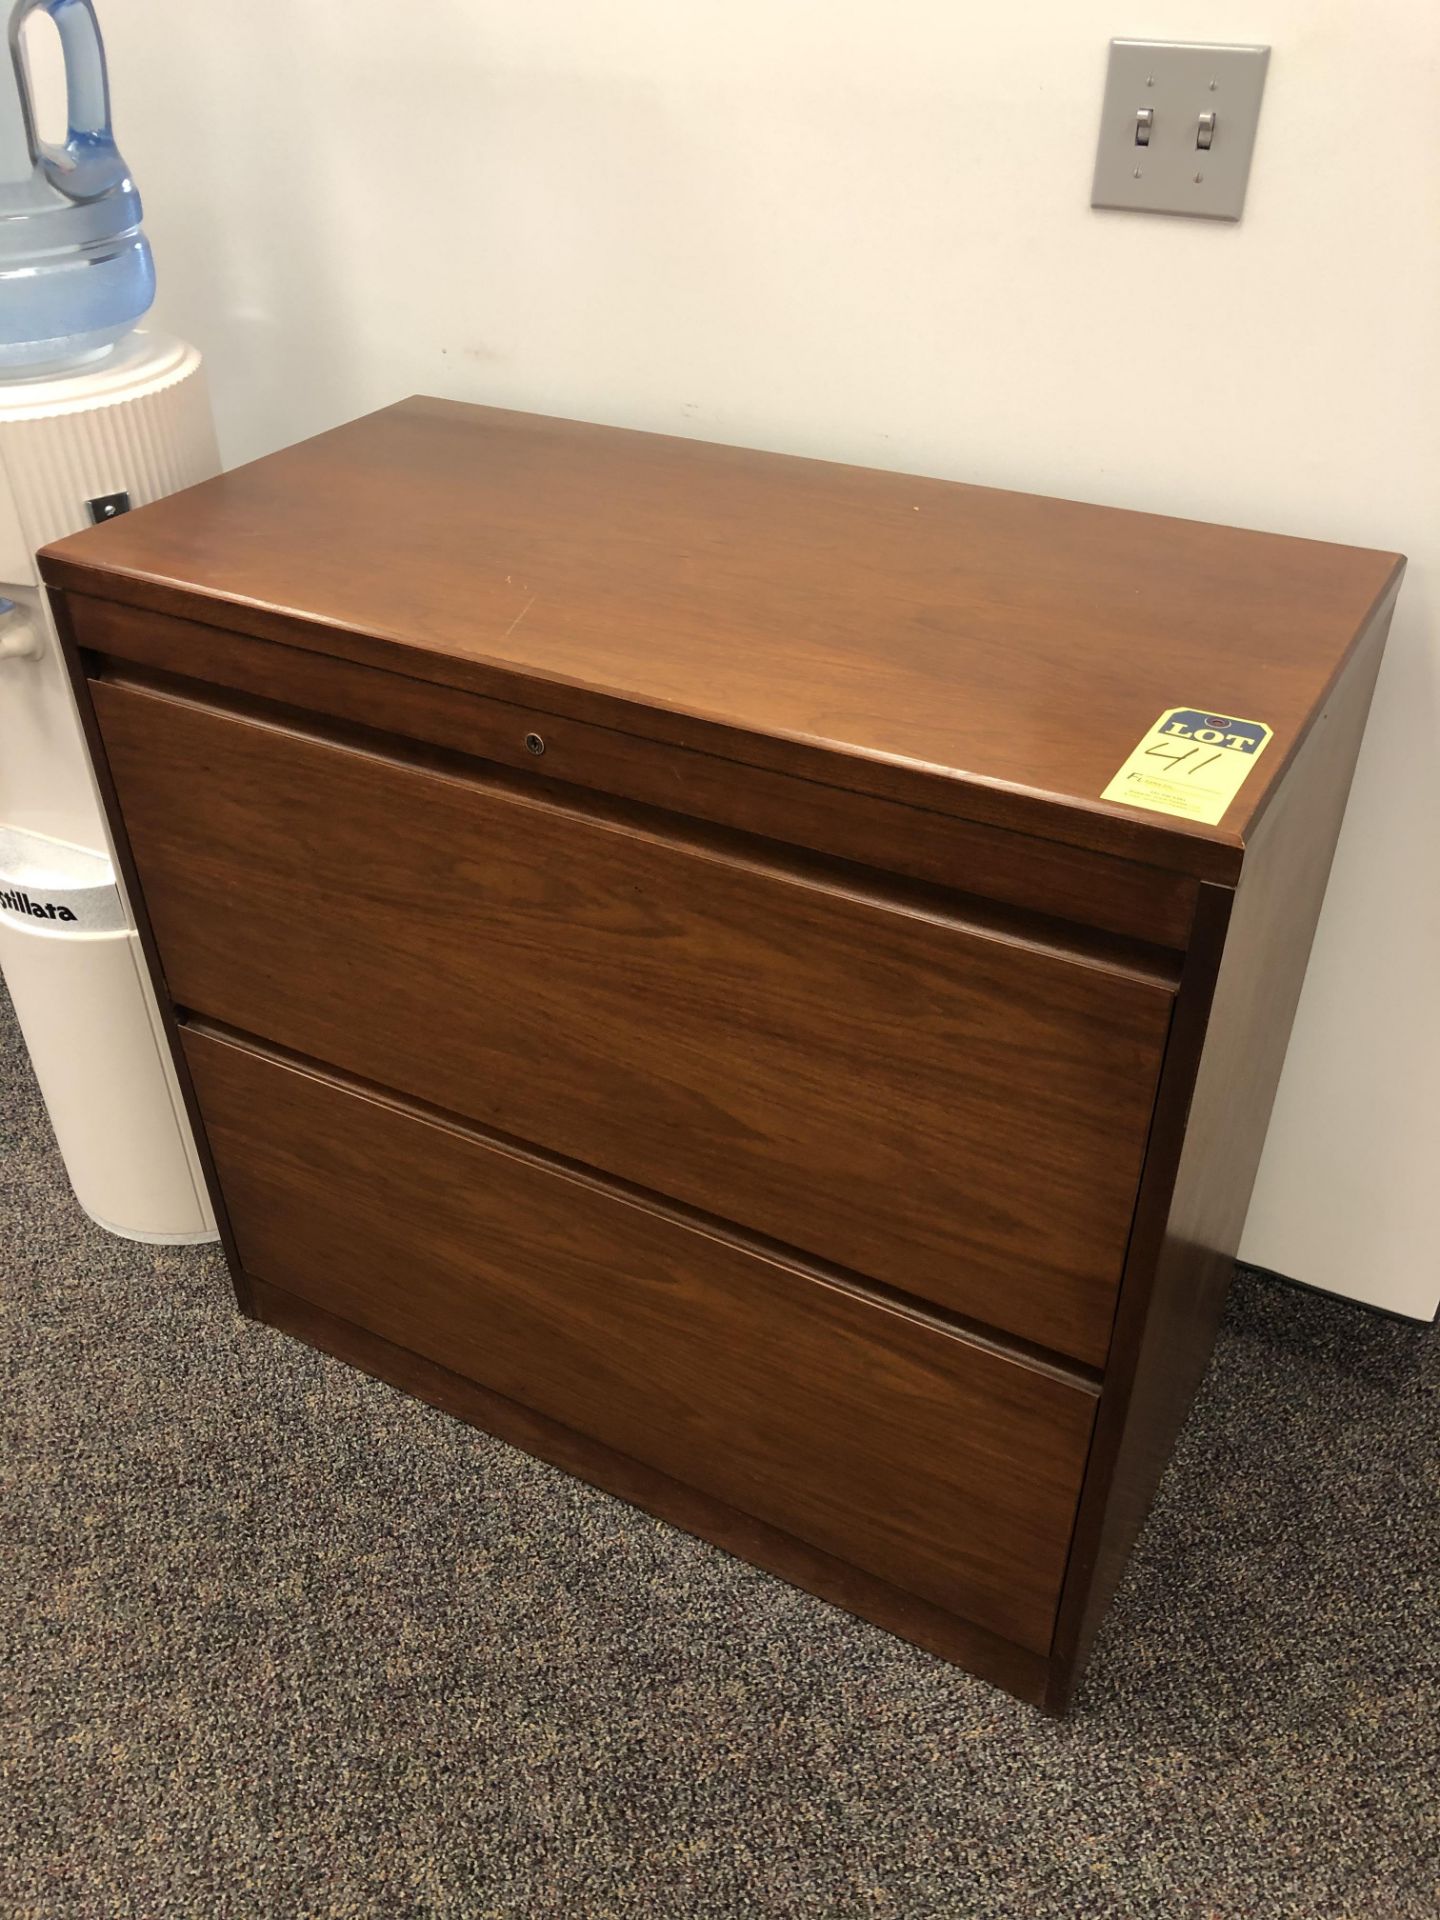 2 DRAWER LATERAL FILE CABINET [WALTON HILLS, OH]